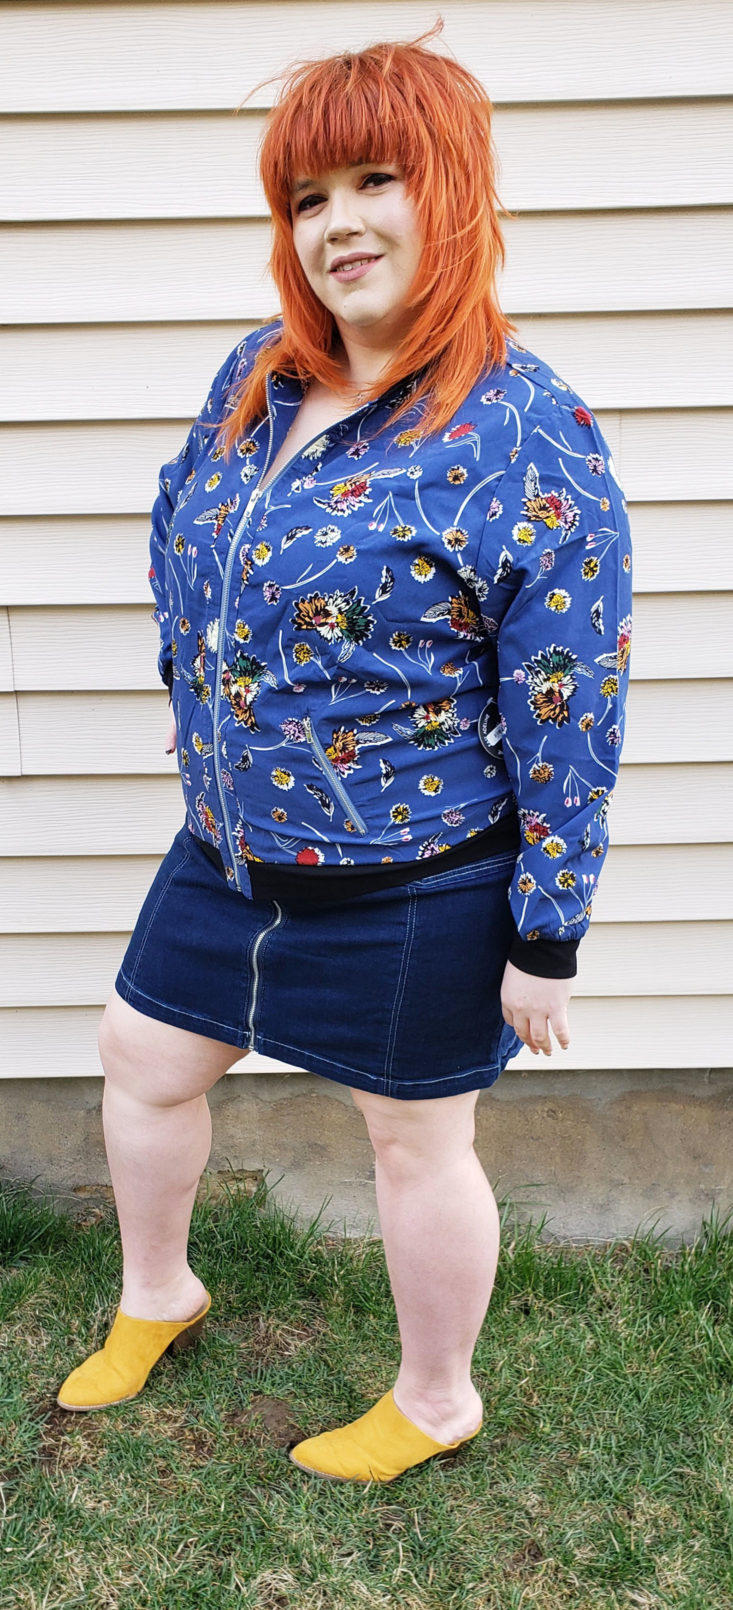 Dia & Co Subscription Box Review March 2019 - Leah Bomber Jacket by East Adeline Size 2x 3 Front